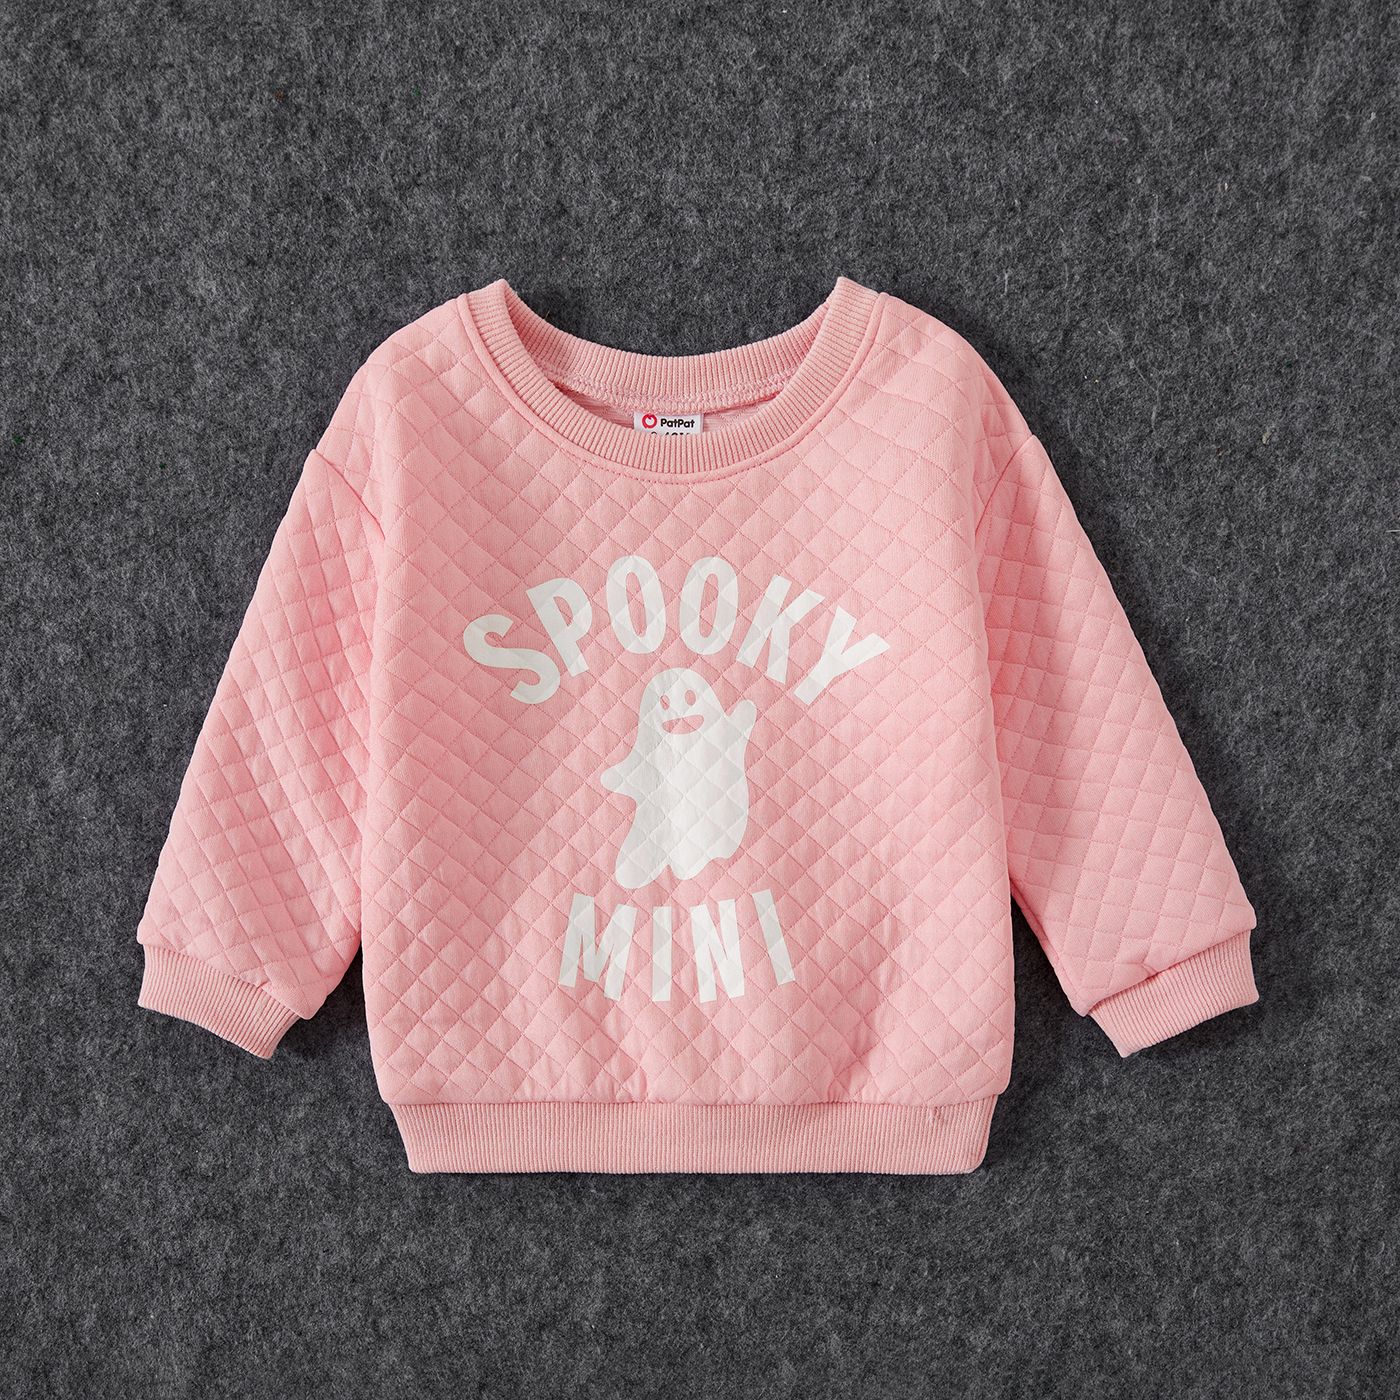 Halloween Family Matching Glow in the Dark Pink Letter & Ghost Print Tops